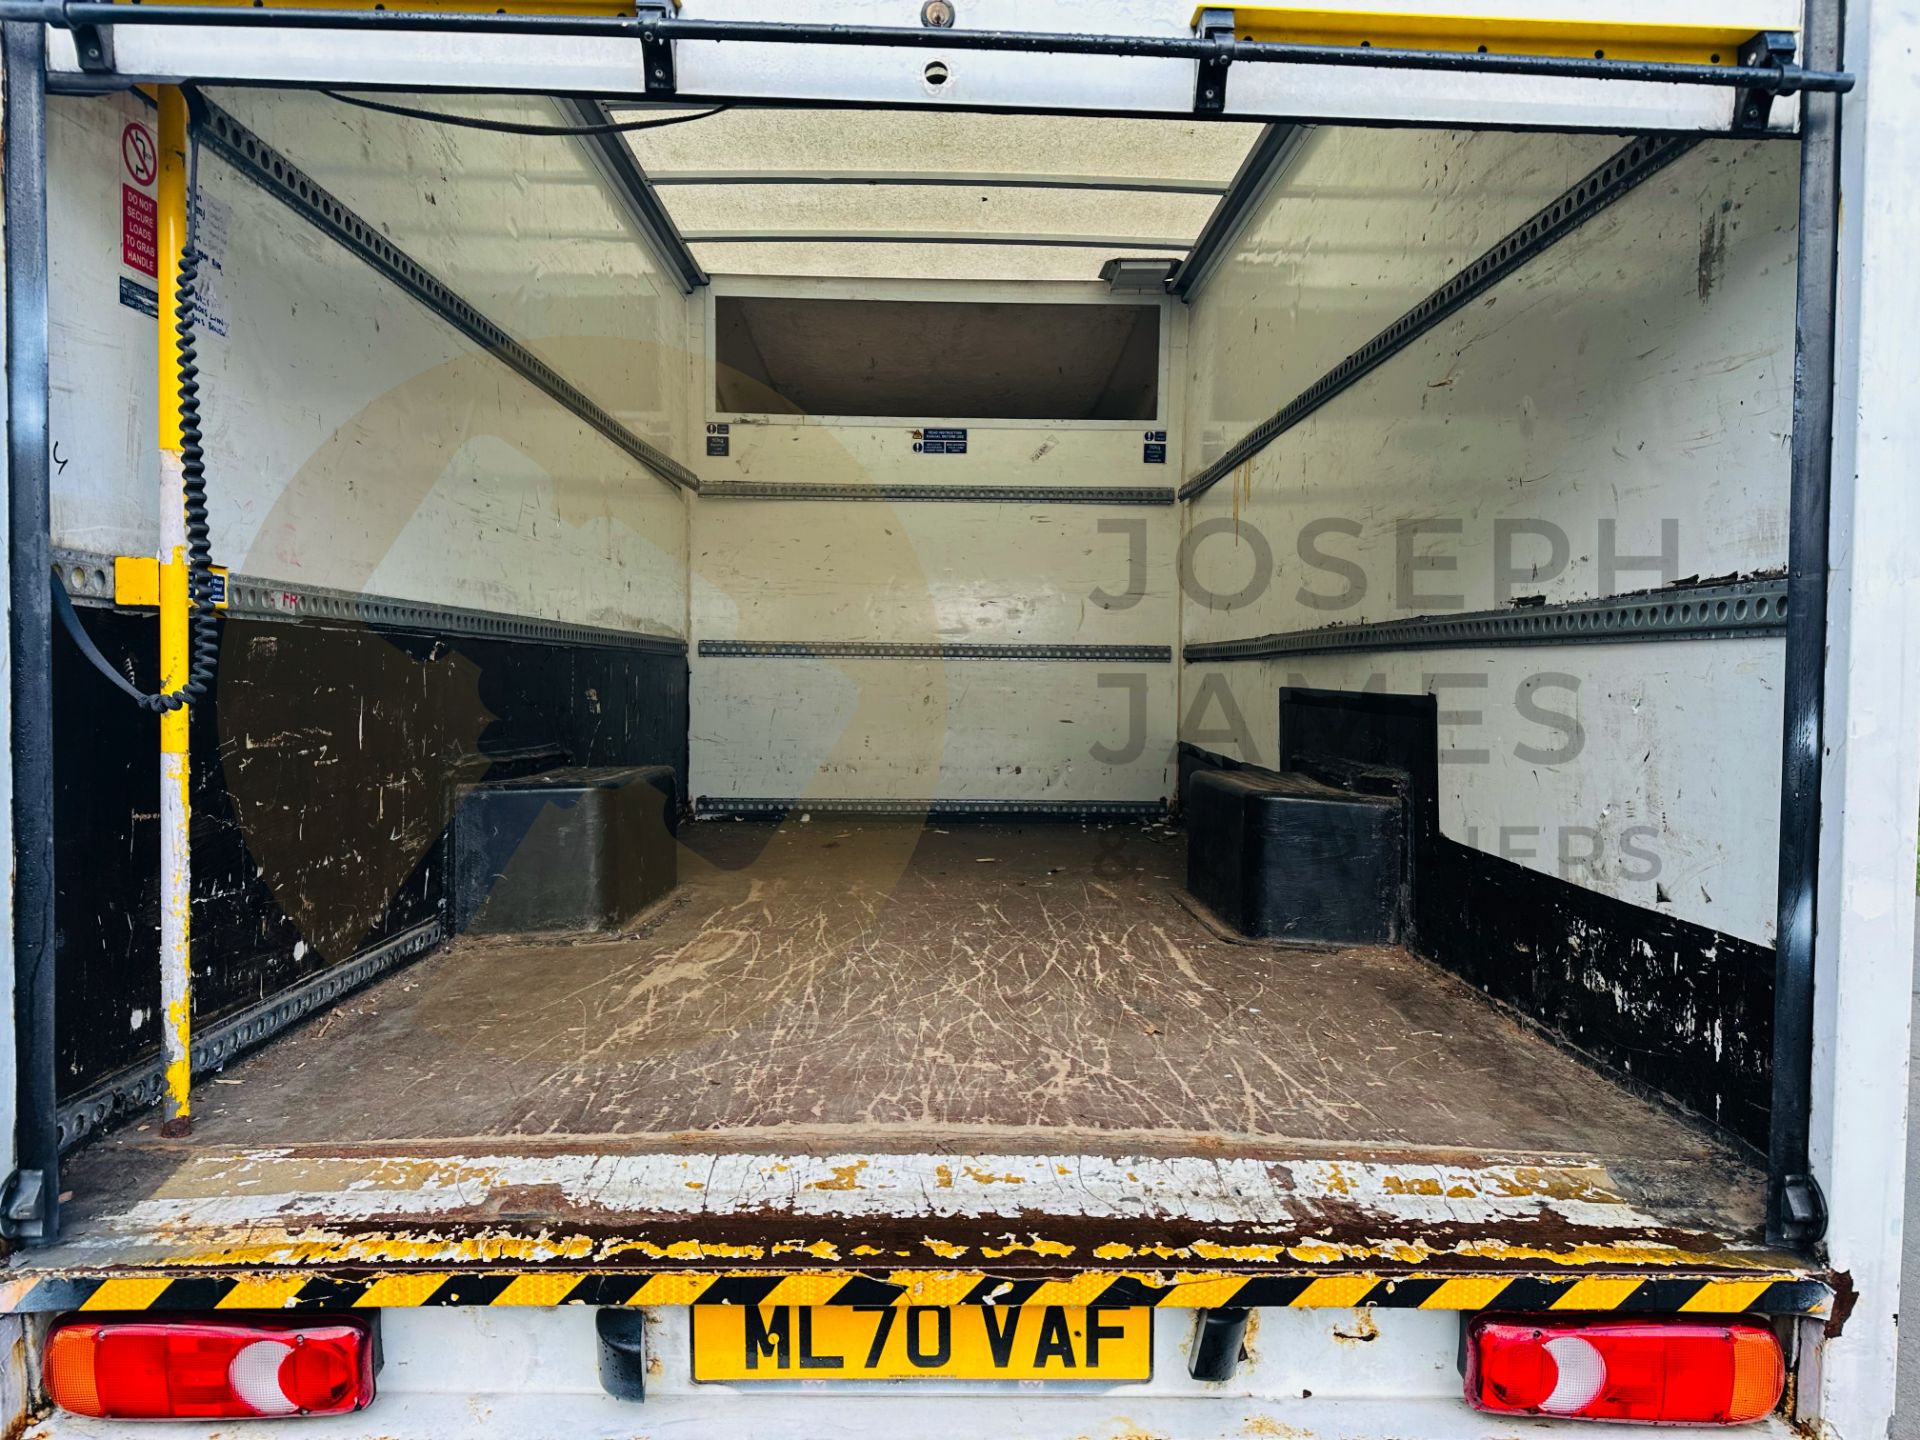 FORD TRANSIT 350 2.2 TDCI *LOW LOADER / LUTON VAN* - 2021 MODEL - 1 PREVIOUS OWNER - ULEZ COMPLIANT! - Image 9 of 26